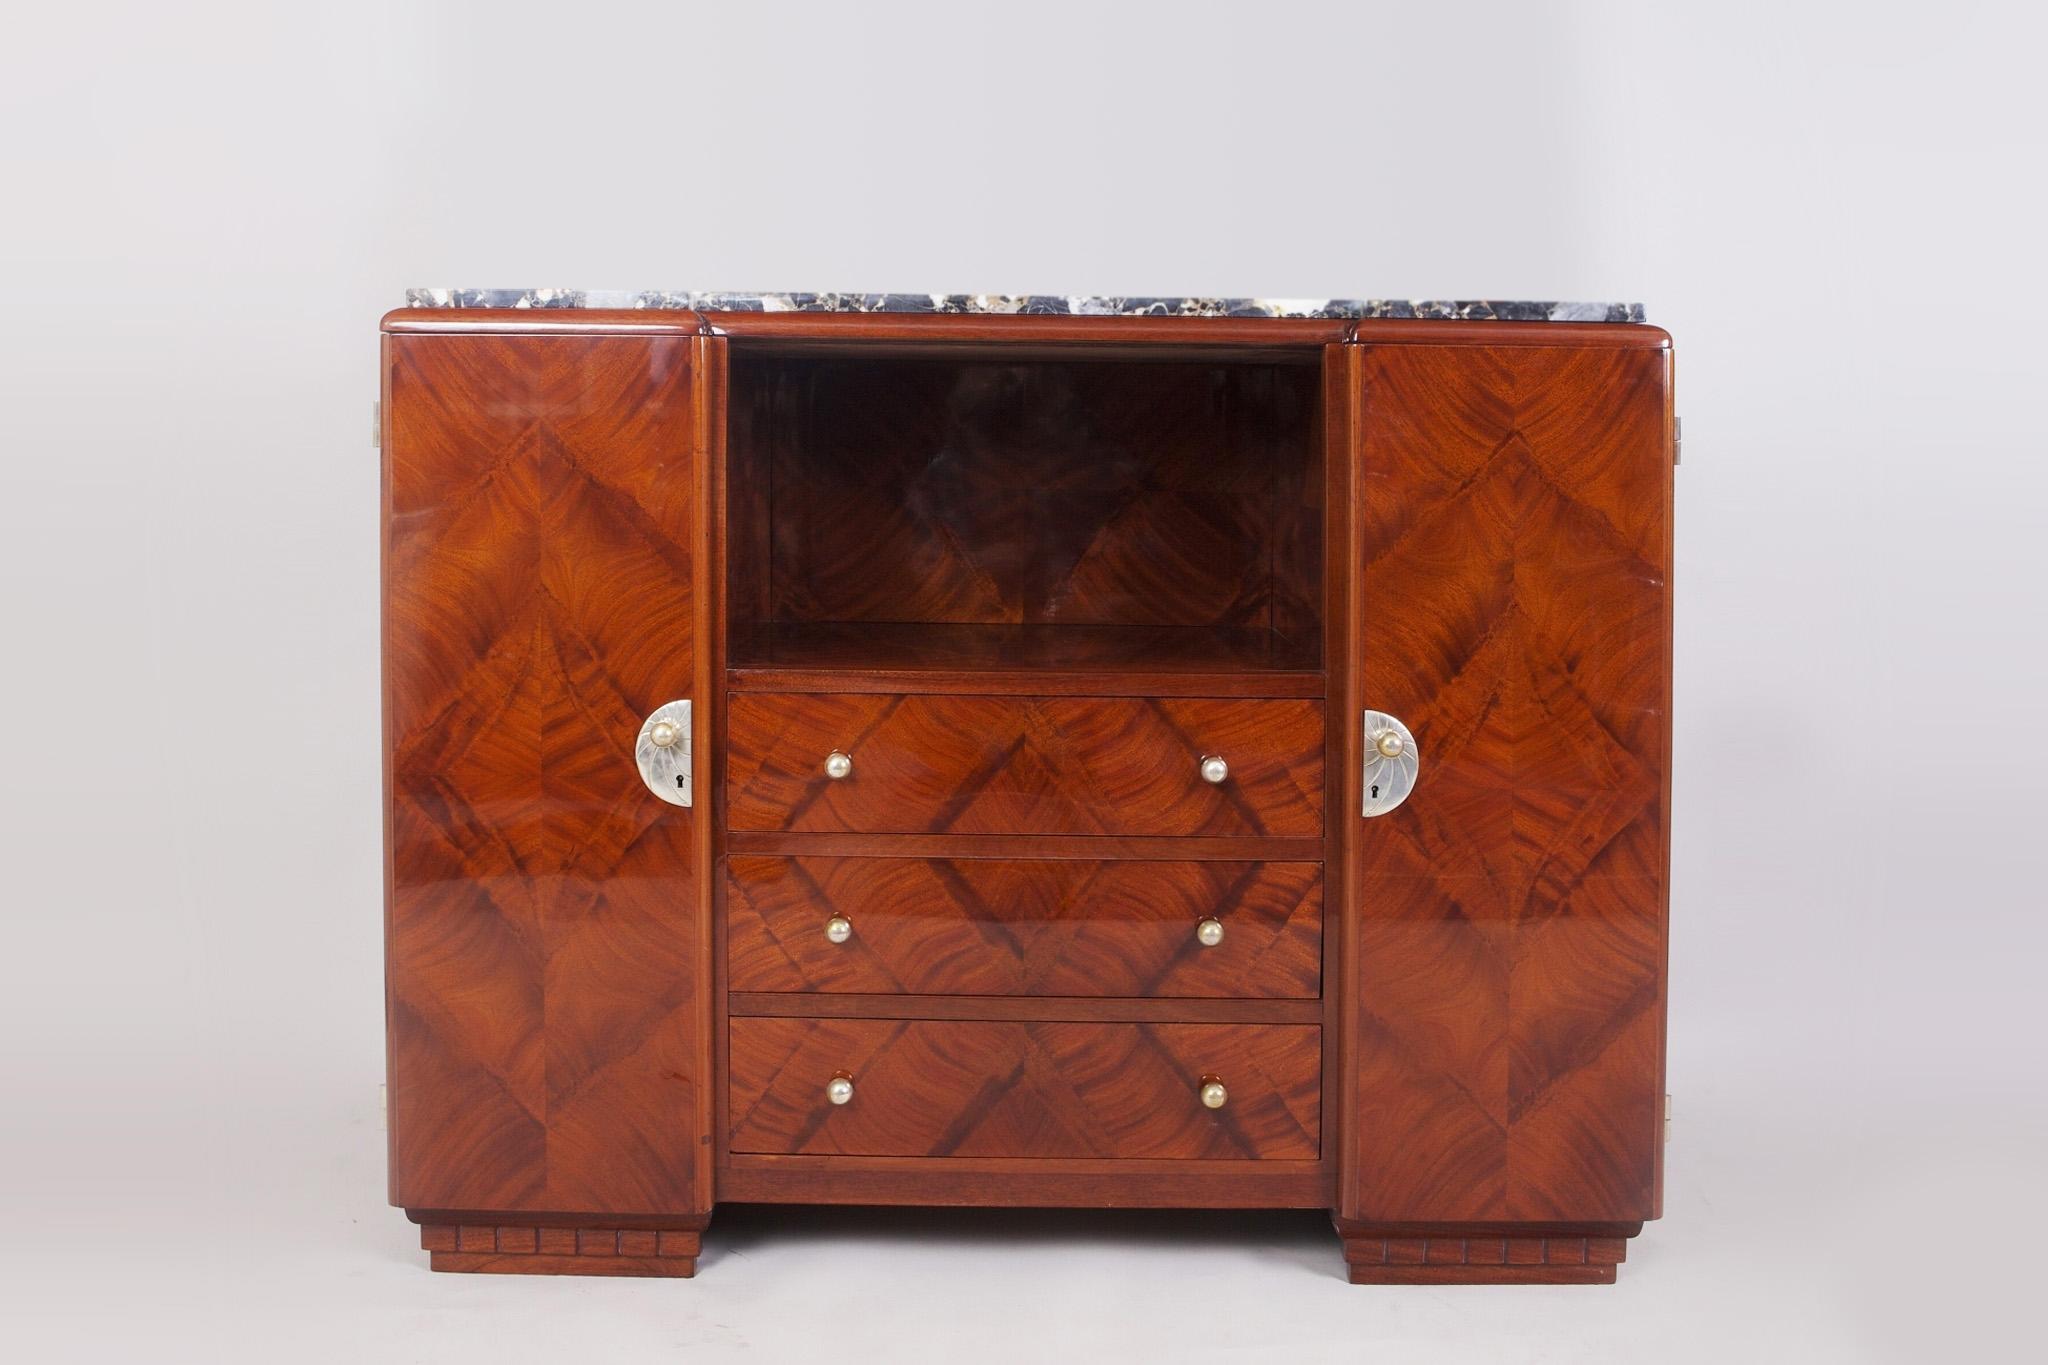 Mahogany Art Deco French Sideboard with Marble Desk and Mirror - 1920-1929 For Sale 2